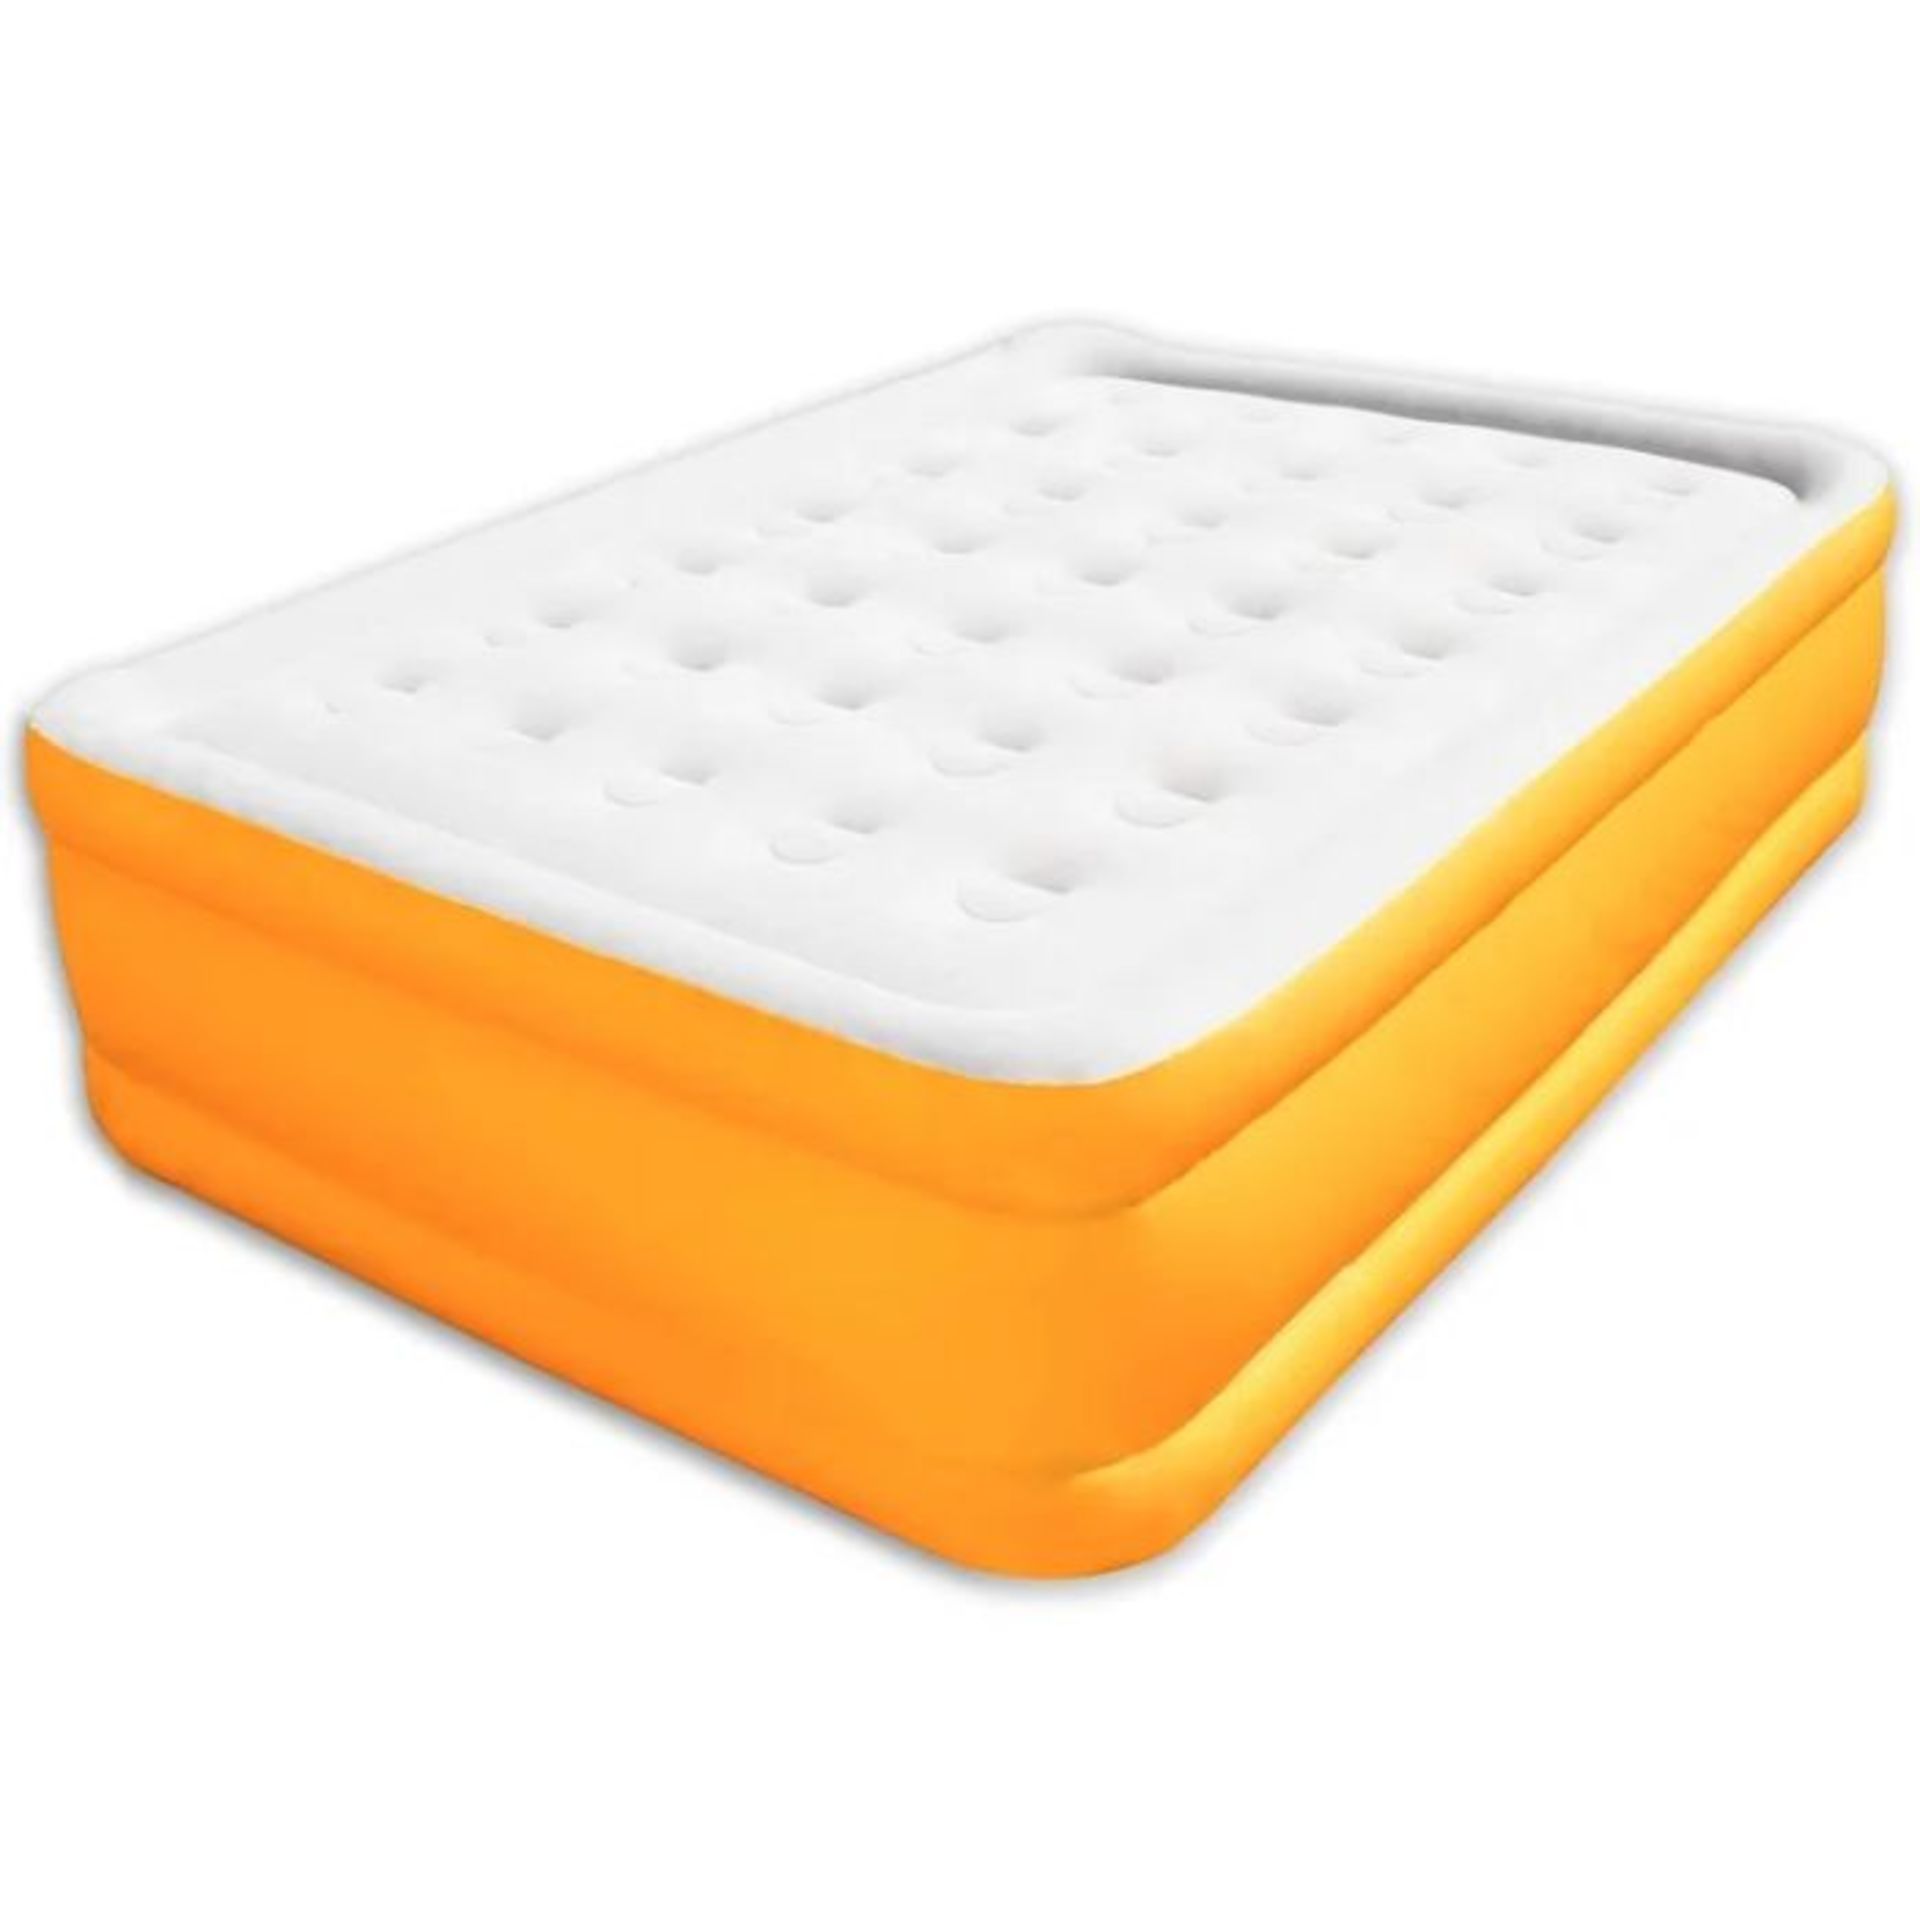 Cozytek, Deluxe Inflatable Mattress Double Blow Up Air Bed With Built In Pump 191 x 137 x 46 cm &